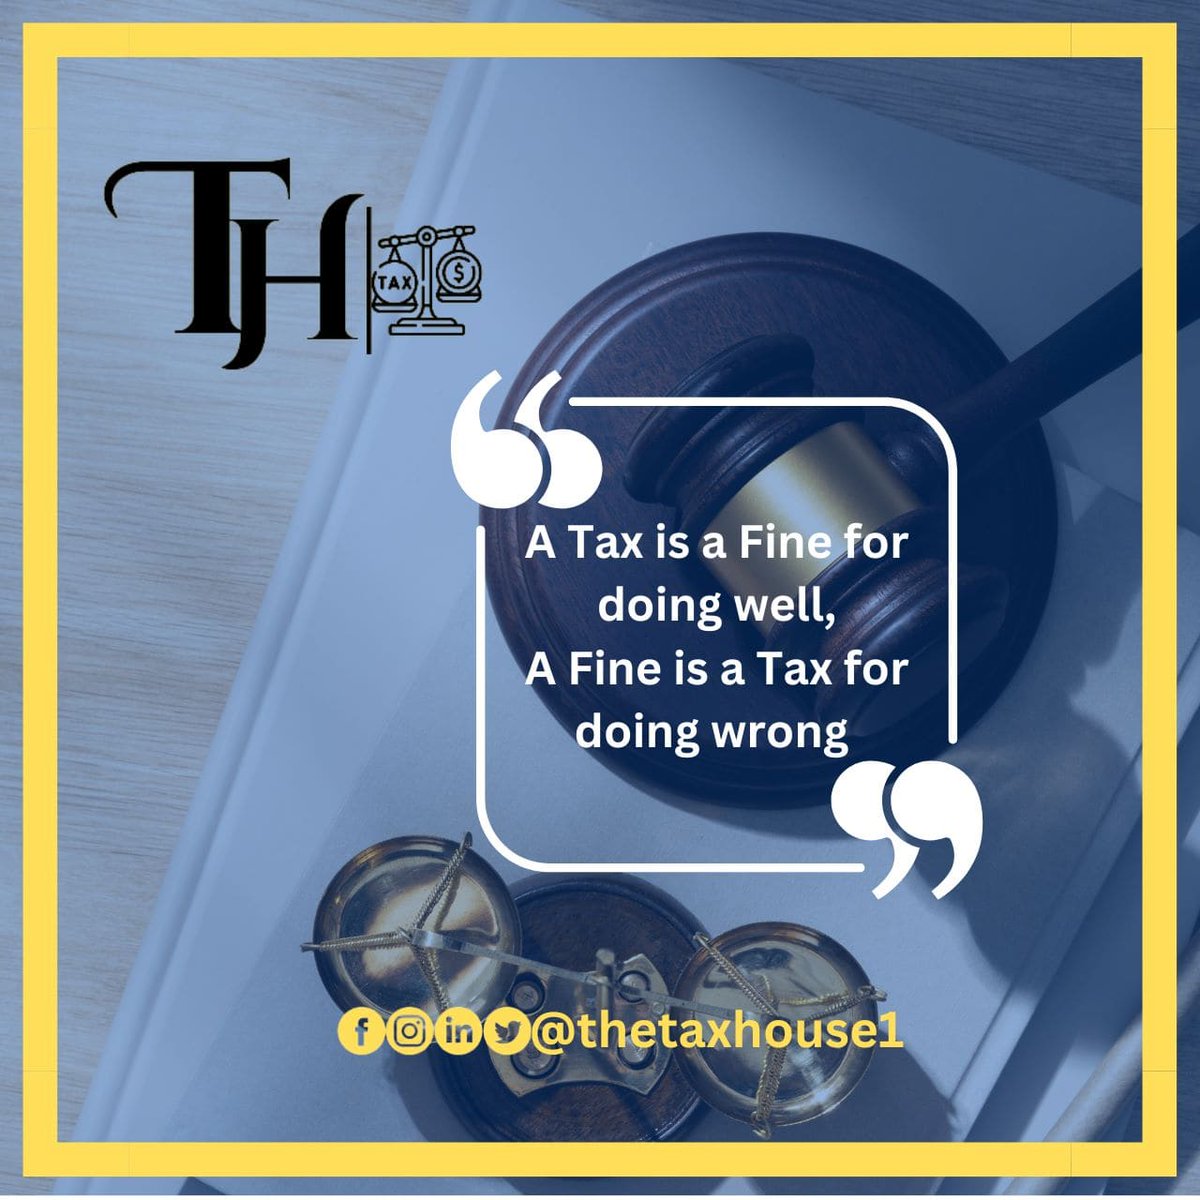 For More Queries Contact us at 
0319 7693140

#tax #taxconsultation #FBR #Registration #taxprofessional #activefiler #incometaxreturn #taxation #SalesTax #taxauditor #taxquestions #secpcompanyregistration #NTNRegistration #filer #thetaxhouse